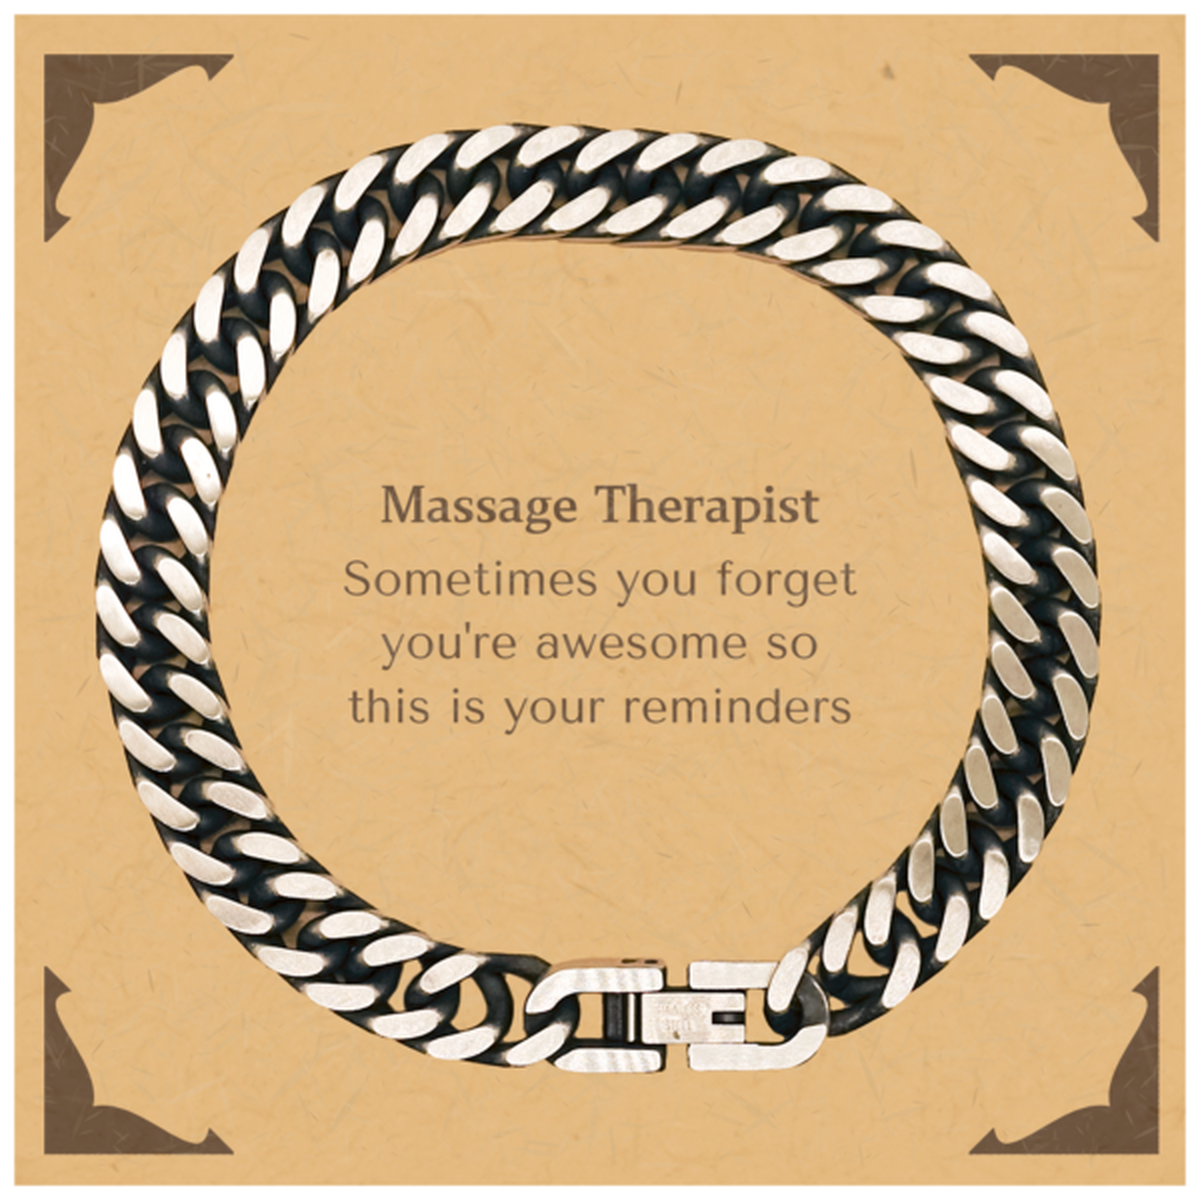 Sentimental Massage Therapist Cuban Link Chain Bracelet, Massage Therapist Sometimes you forget you're awesome so this is your reminders, Graduation Christmas Birthday Gifts for Massage Therapist, Men, Women, Coworkers